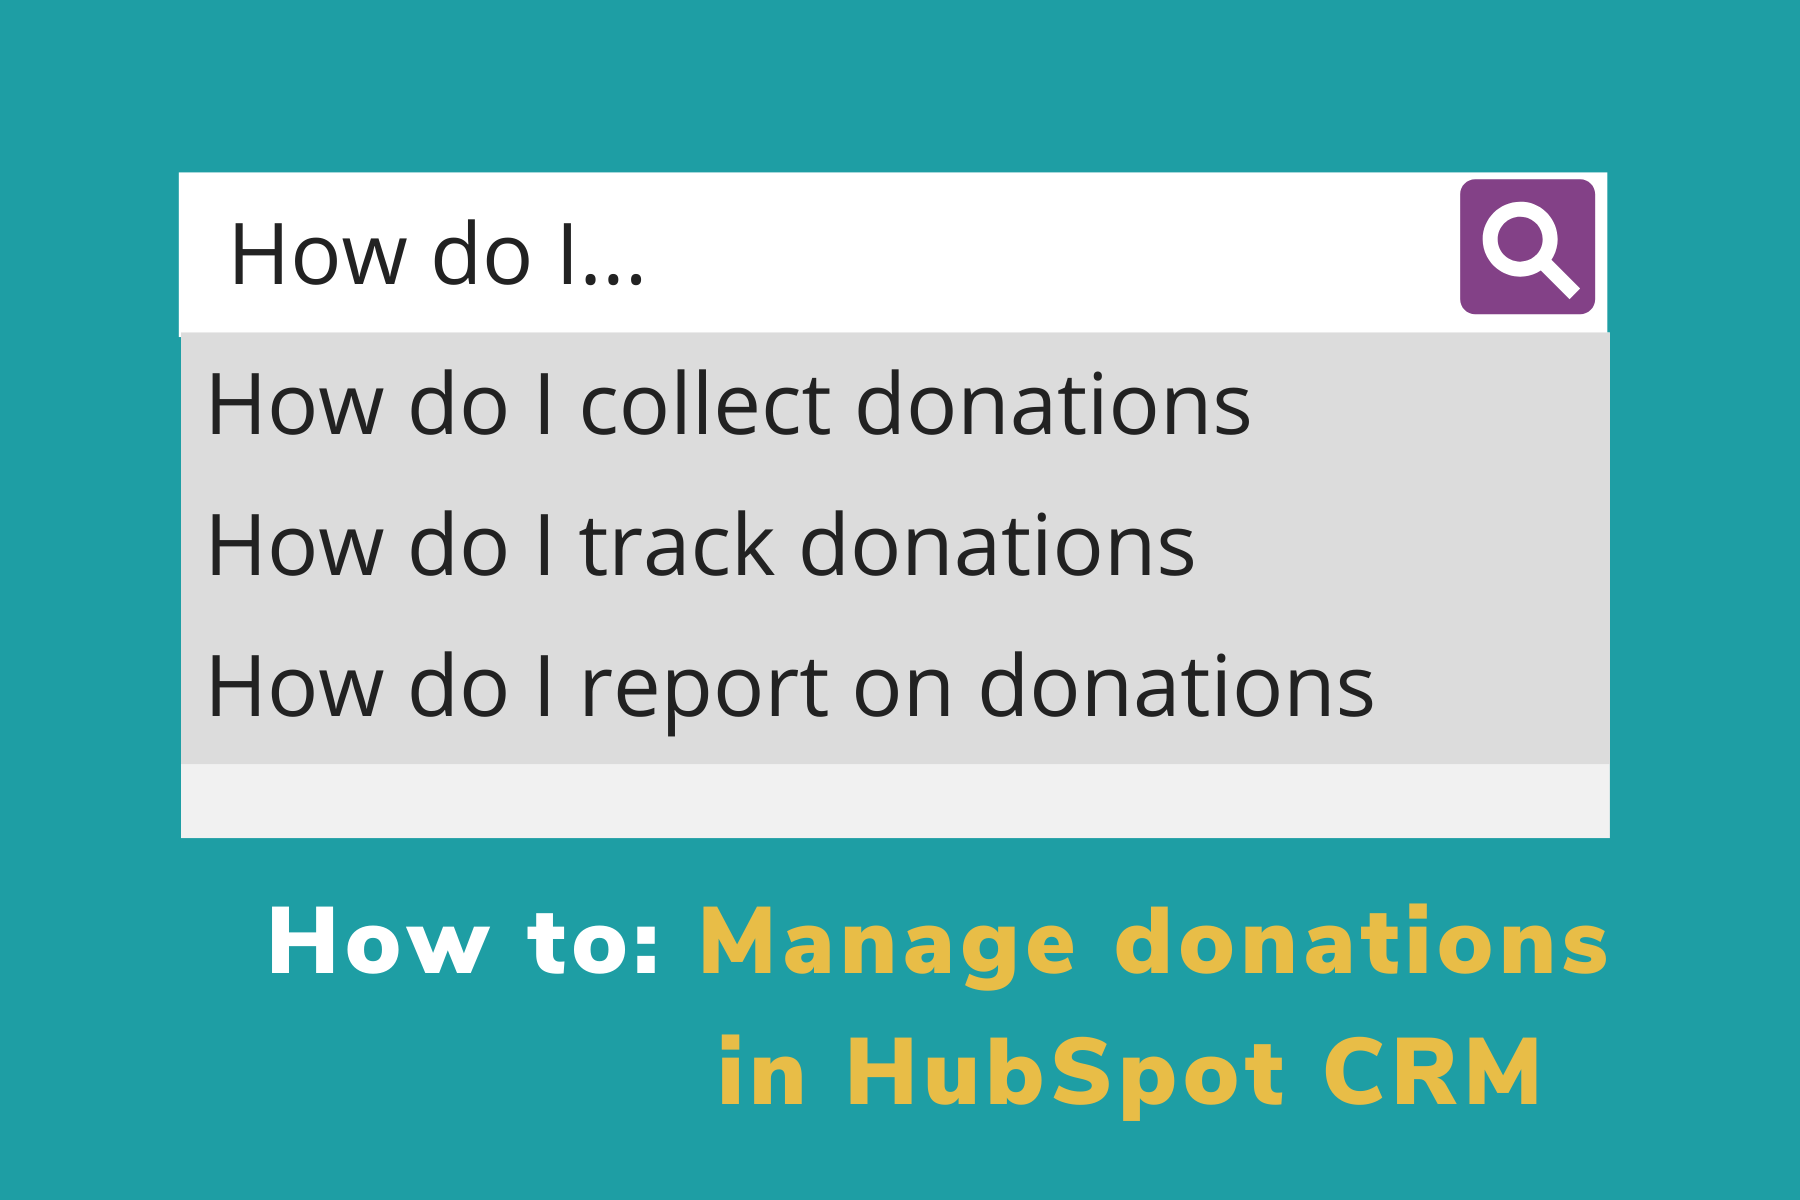 How to manage donations for charities and non-profits in HubSpot CRM